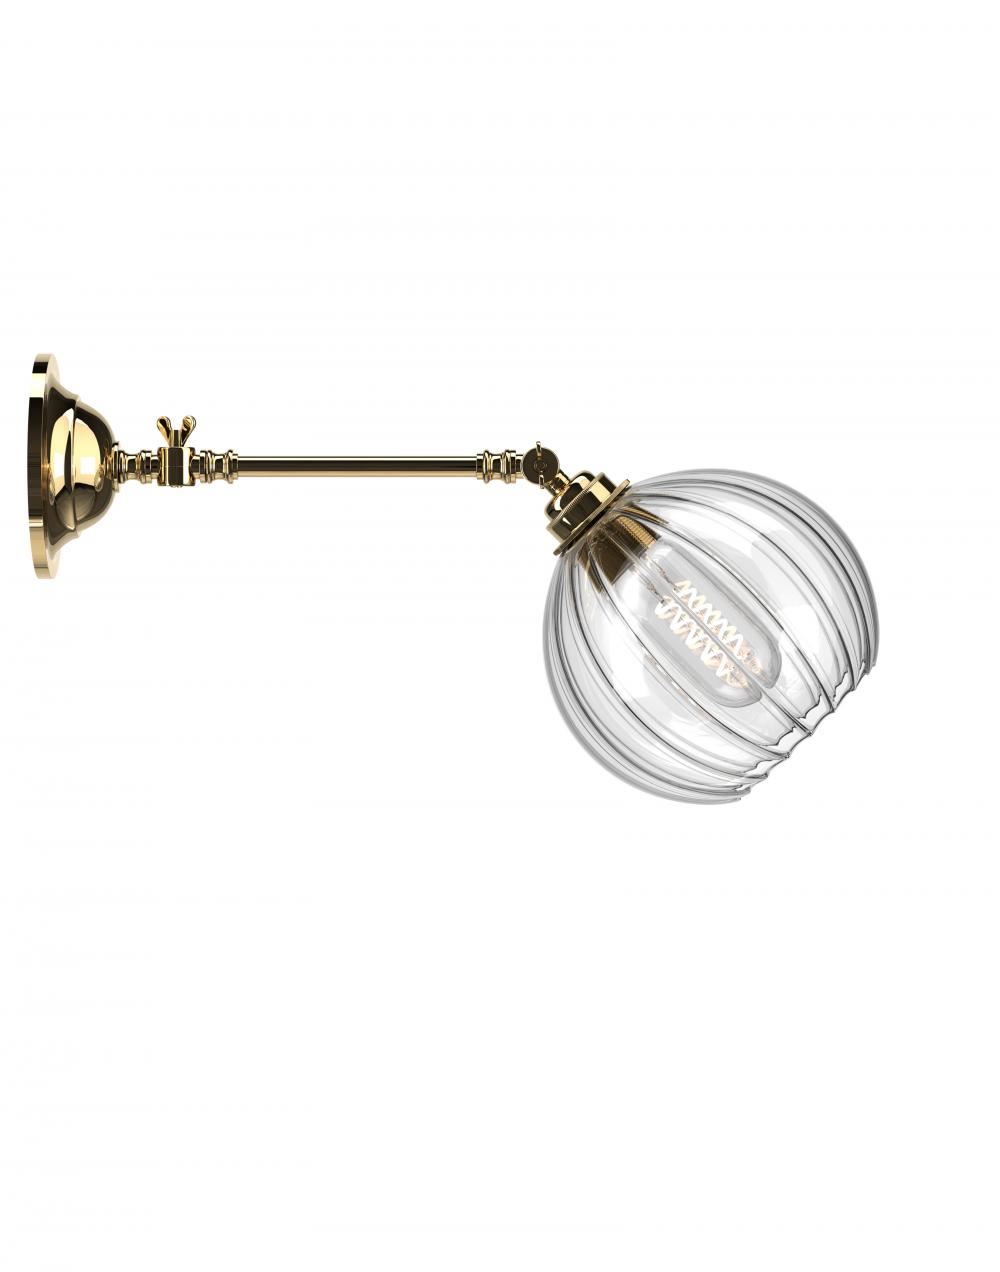 Fritz Fryer Hereford Adjustable Reading Light Medium Ribbed Polished Brass Wall Lighting Clear